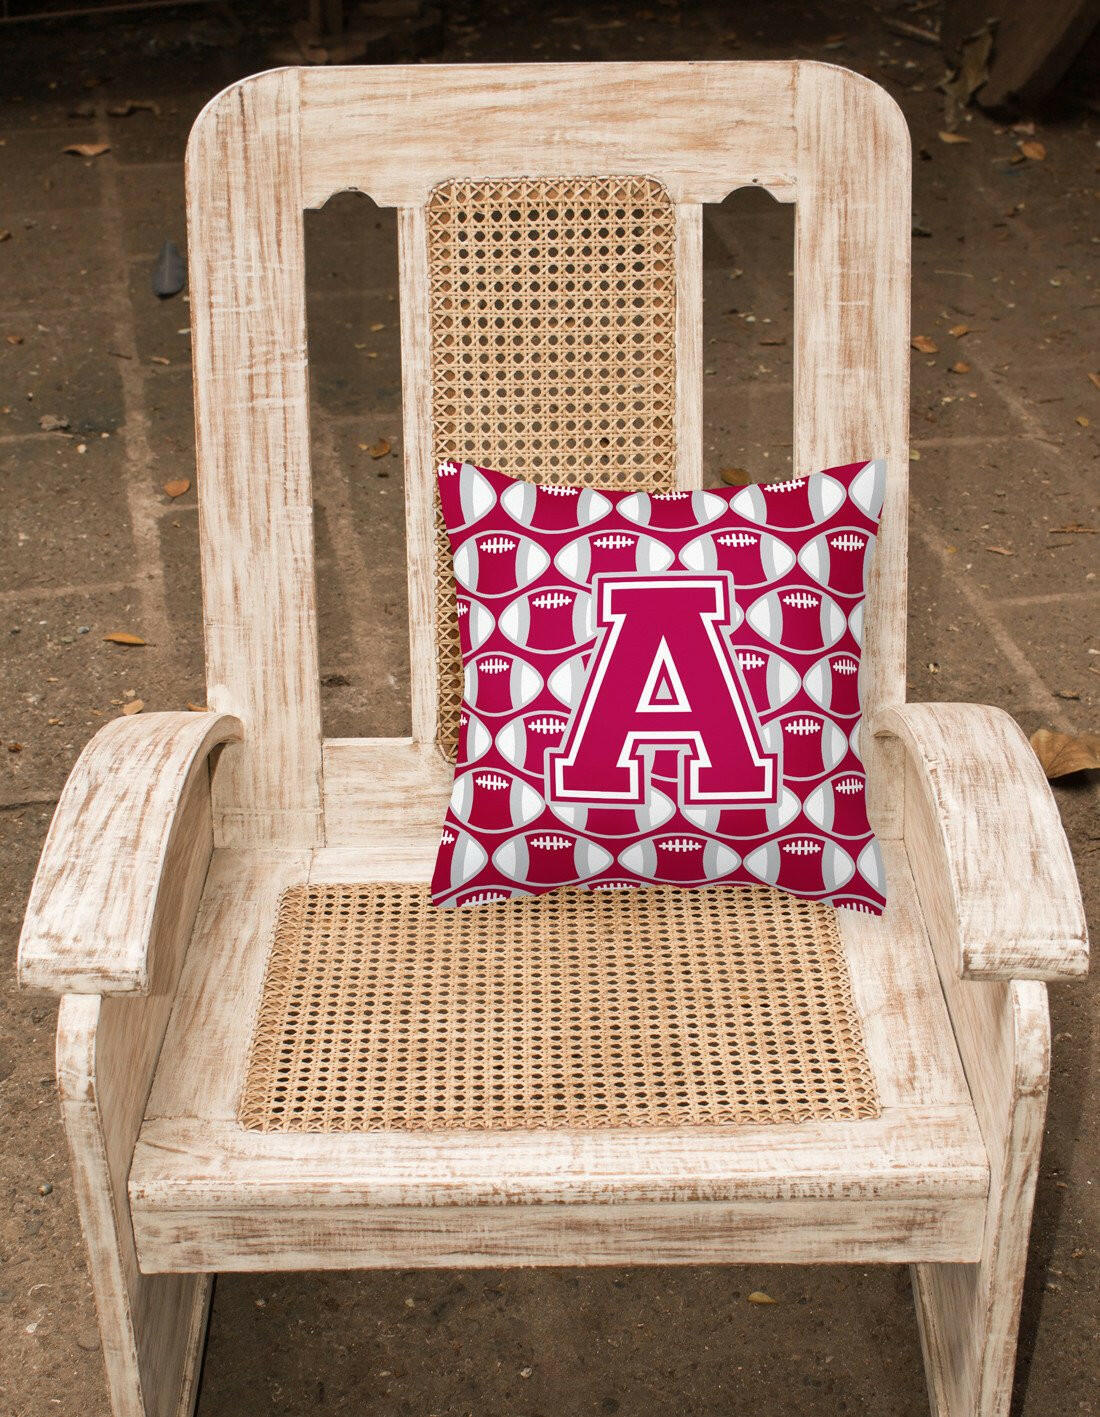 Letter A Football Crimson, grey and white Fabric Decorative Pillow CJ1065-APW1414 by Caroline's Treasures